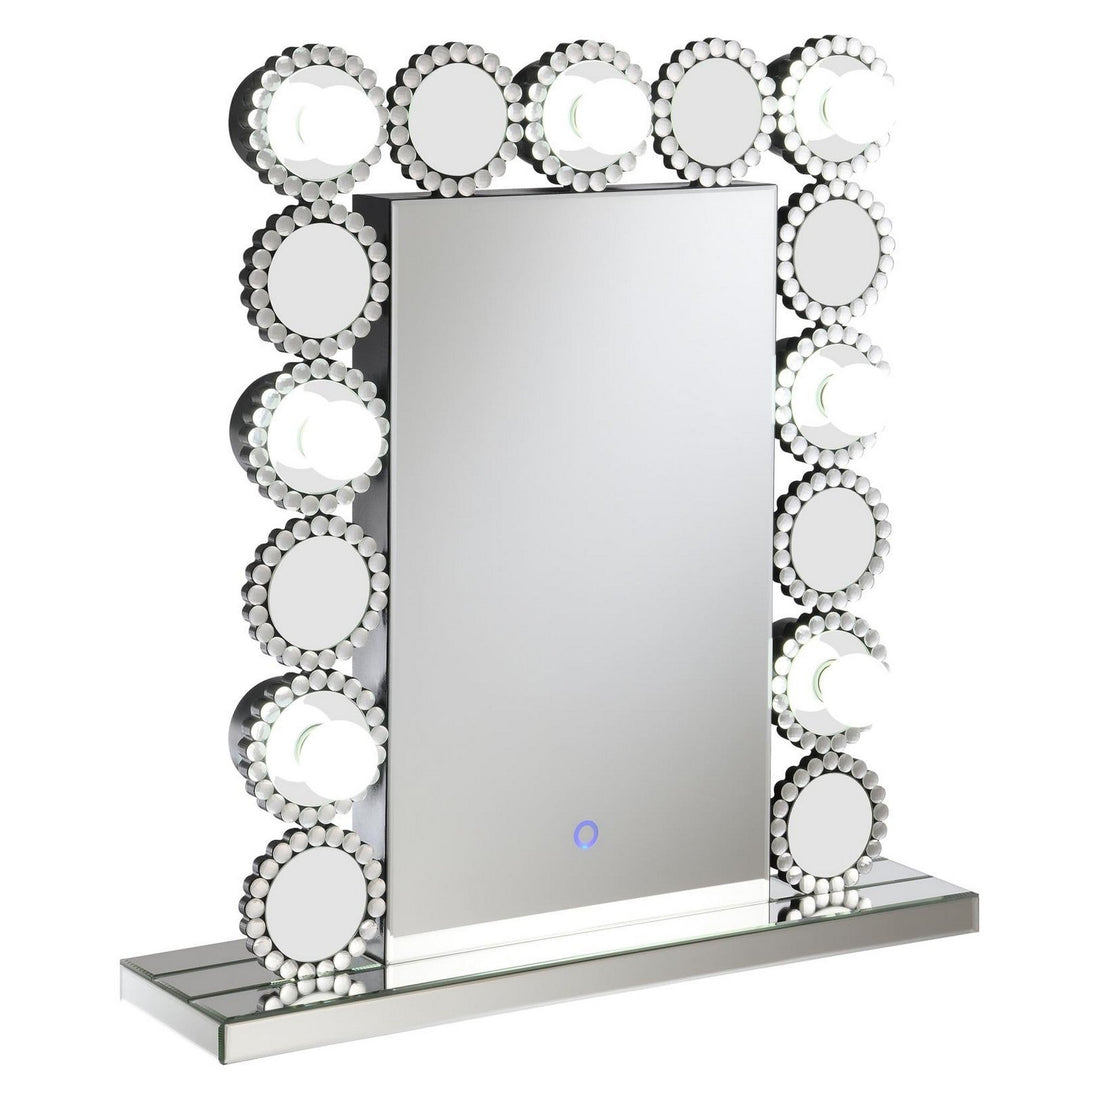 Aghes Rectangular Table Mirror with LED Lighting Mirror 961624